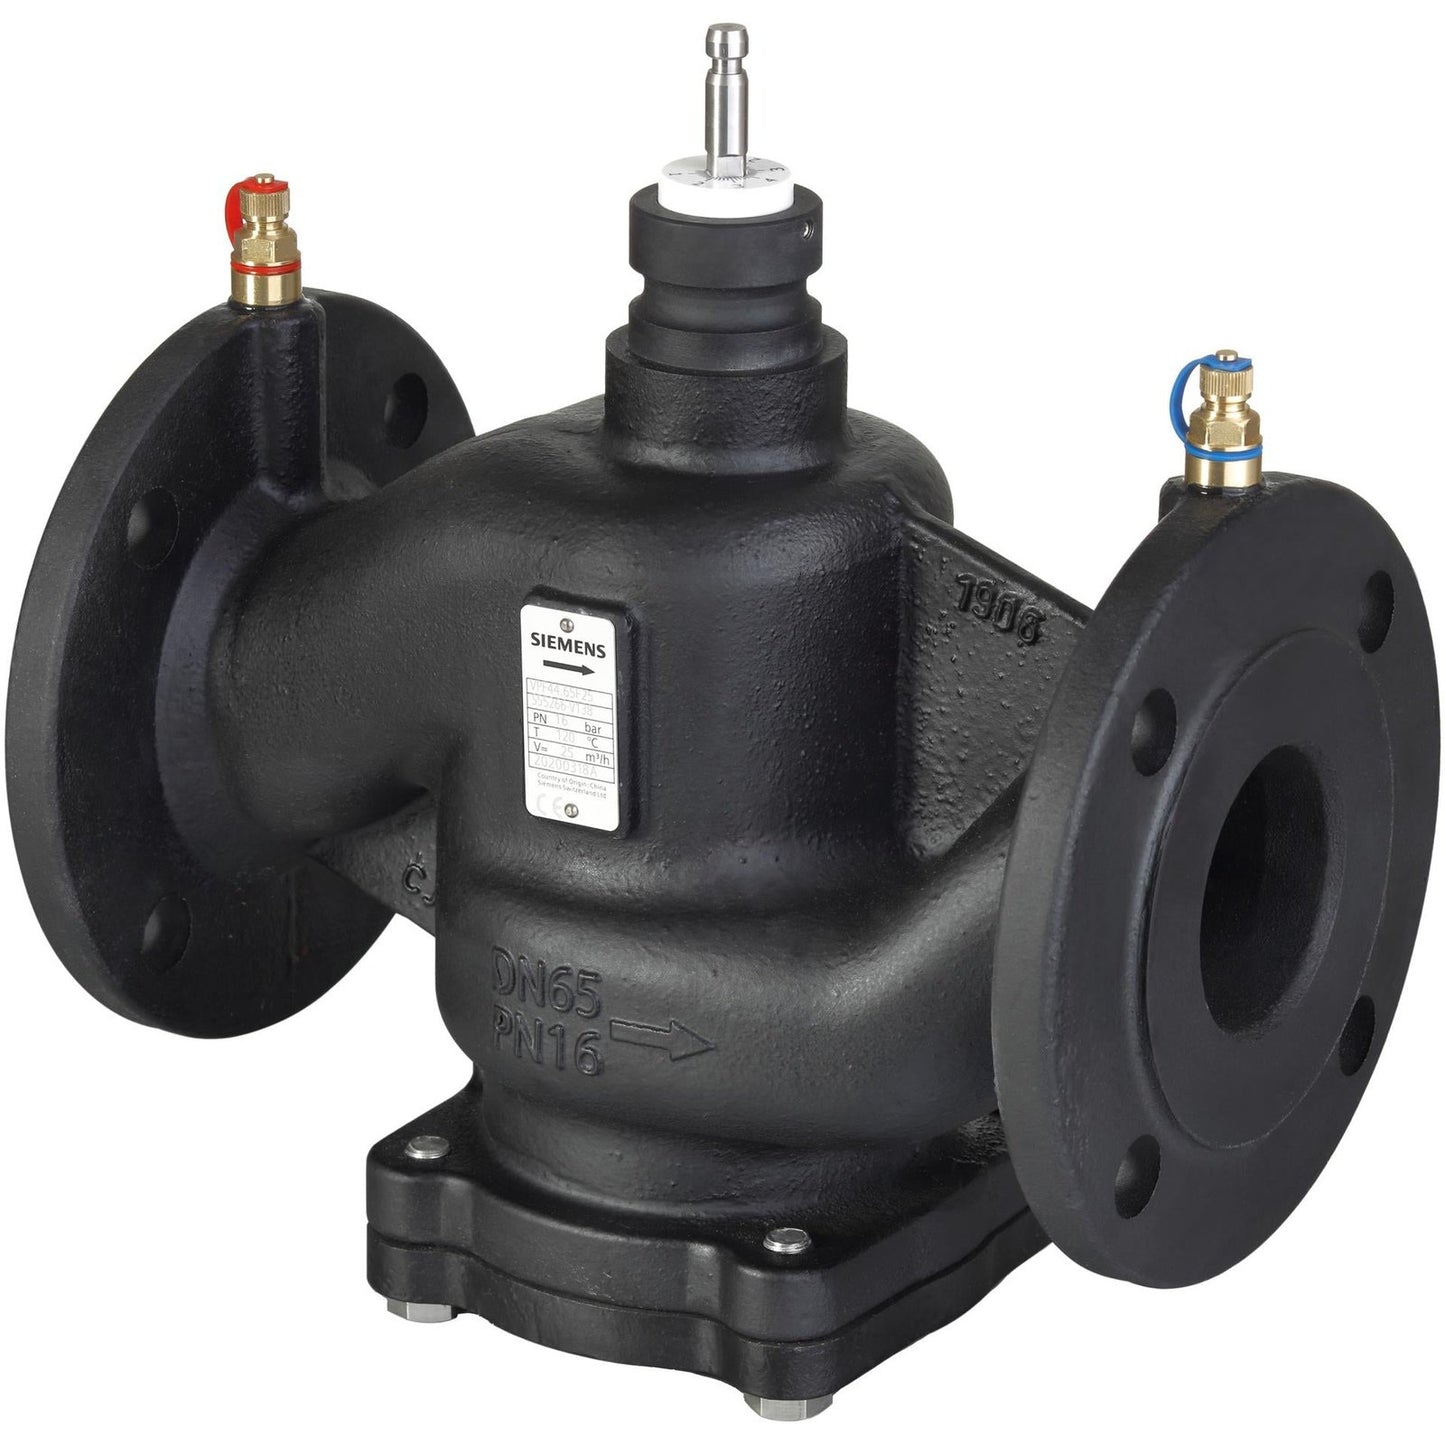 VPF44.65F35 Pressure independent control valve (PICV), PN16, DN65, with flanged connections